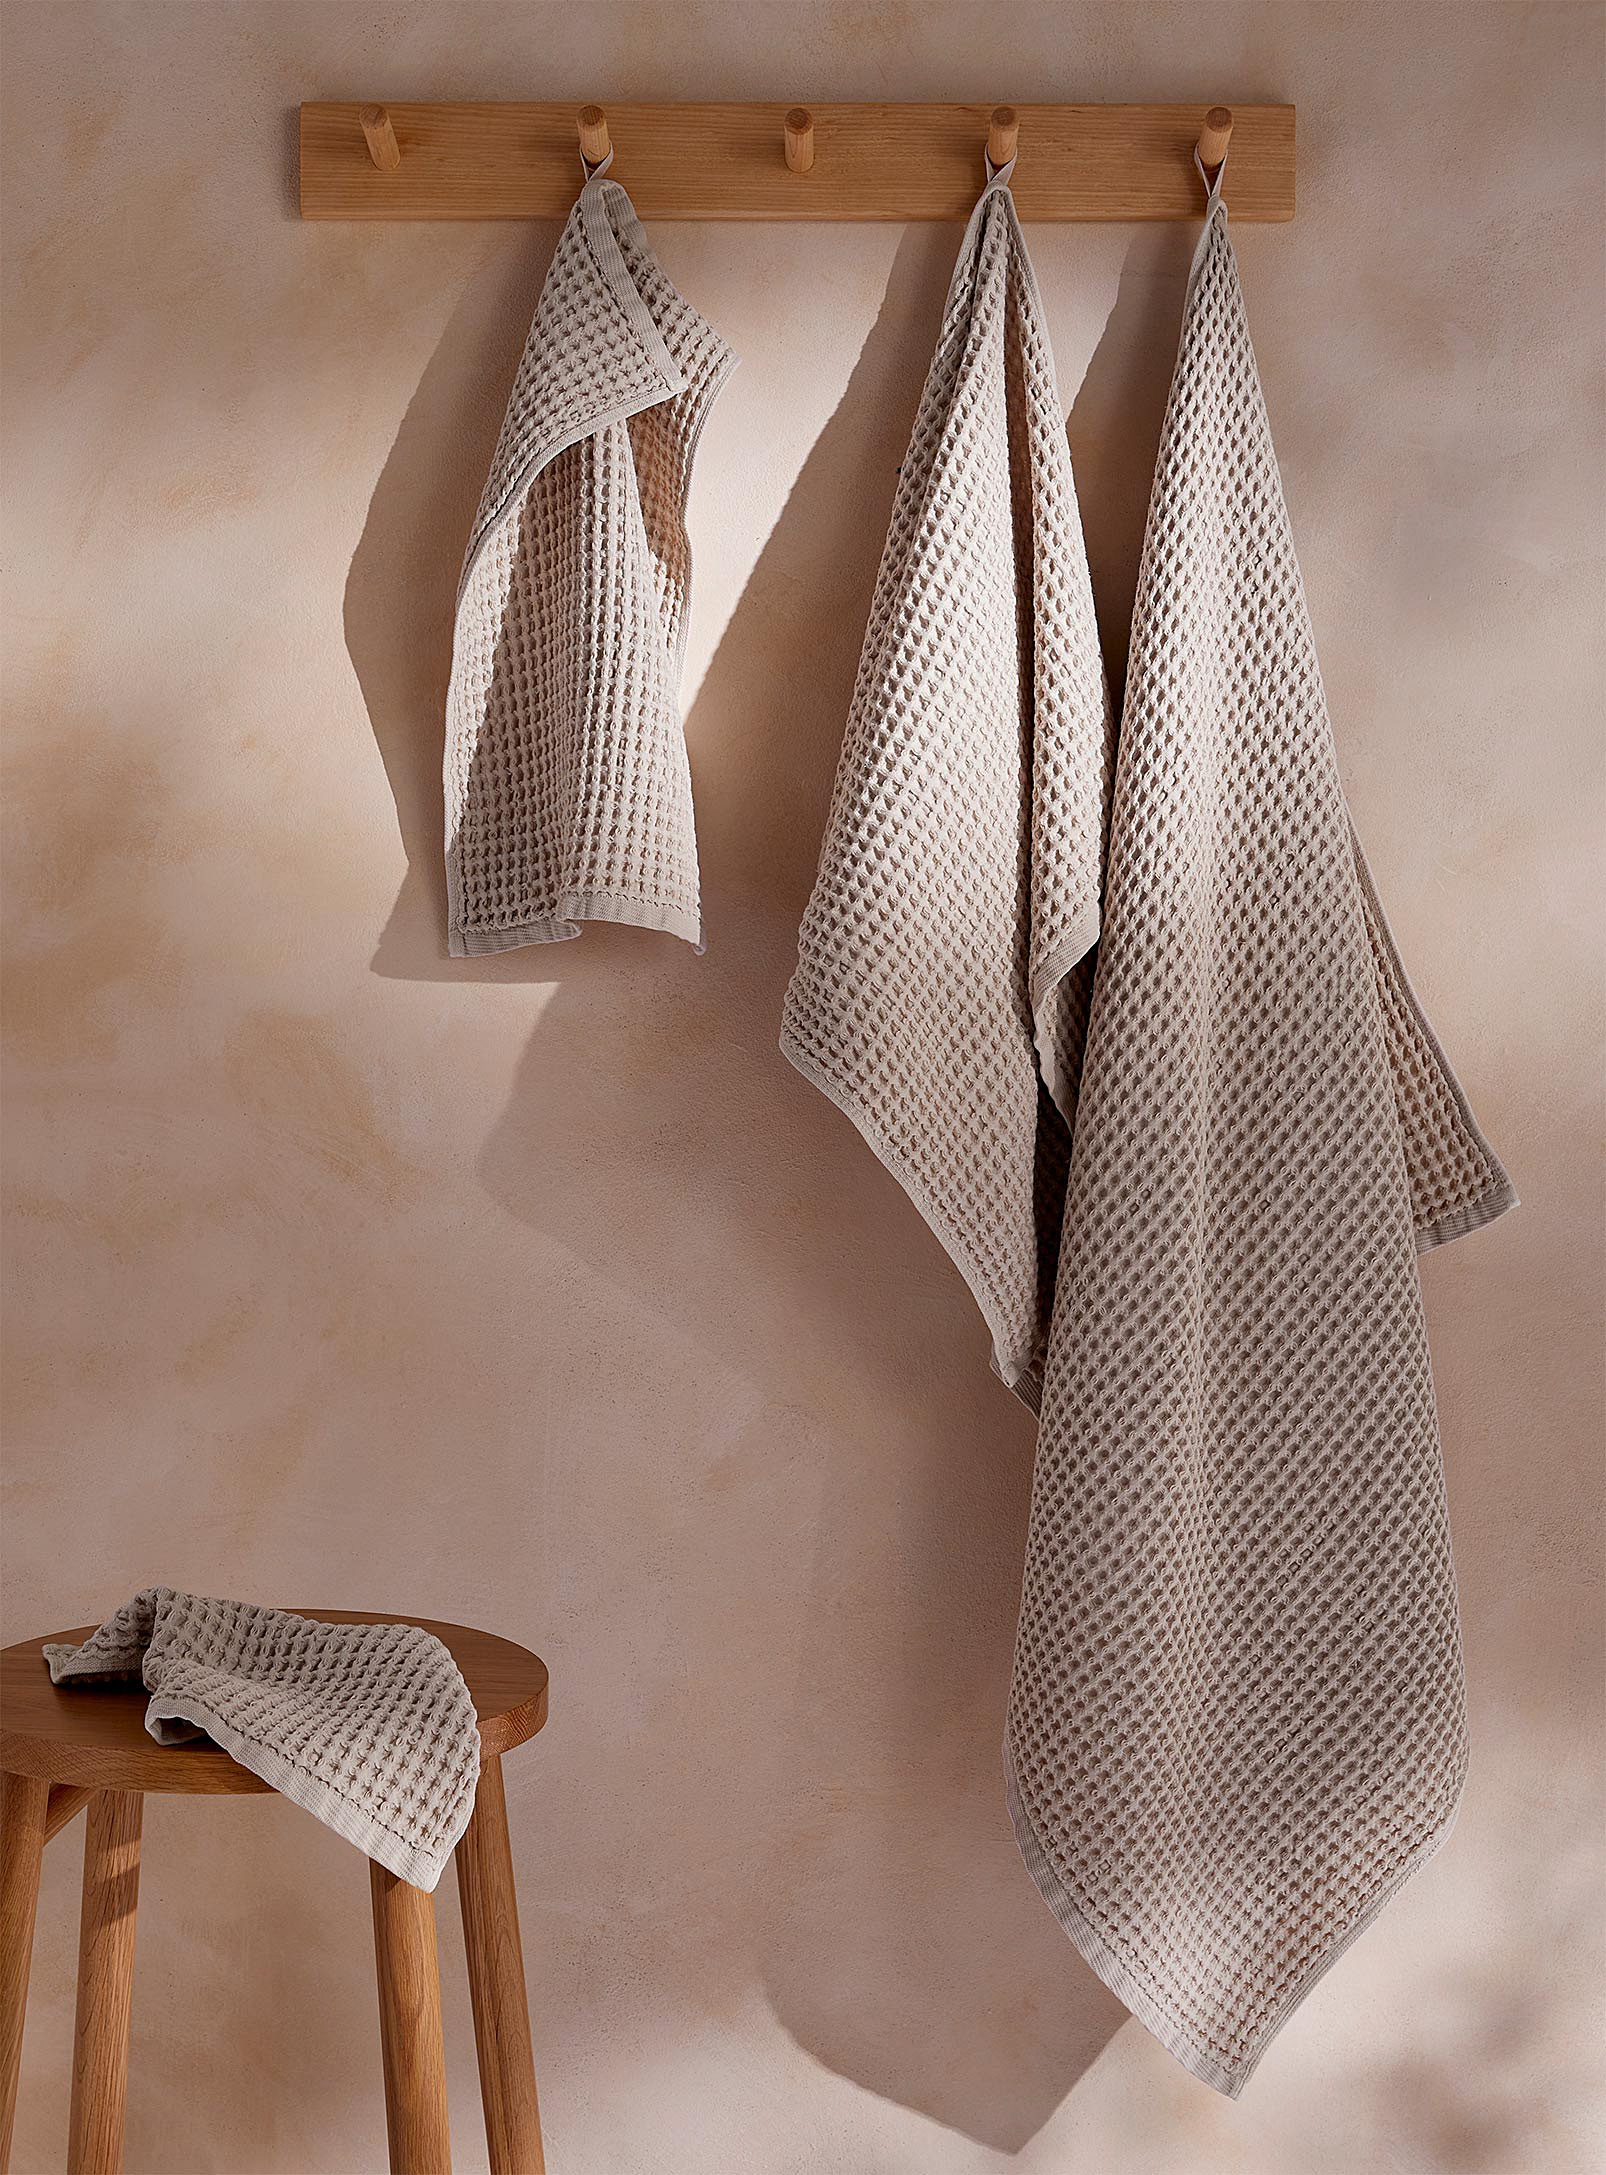 Simons Maison Waffled Towels In Cream Beige